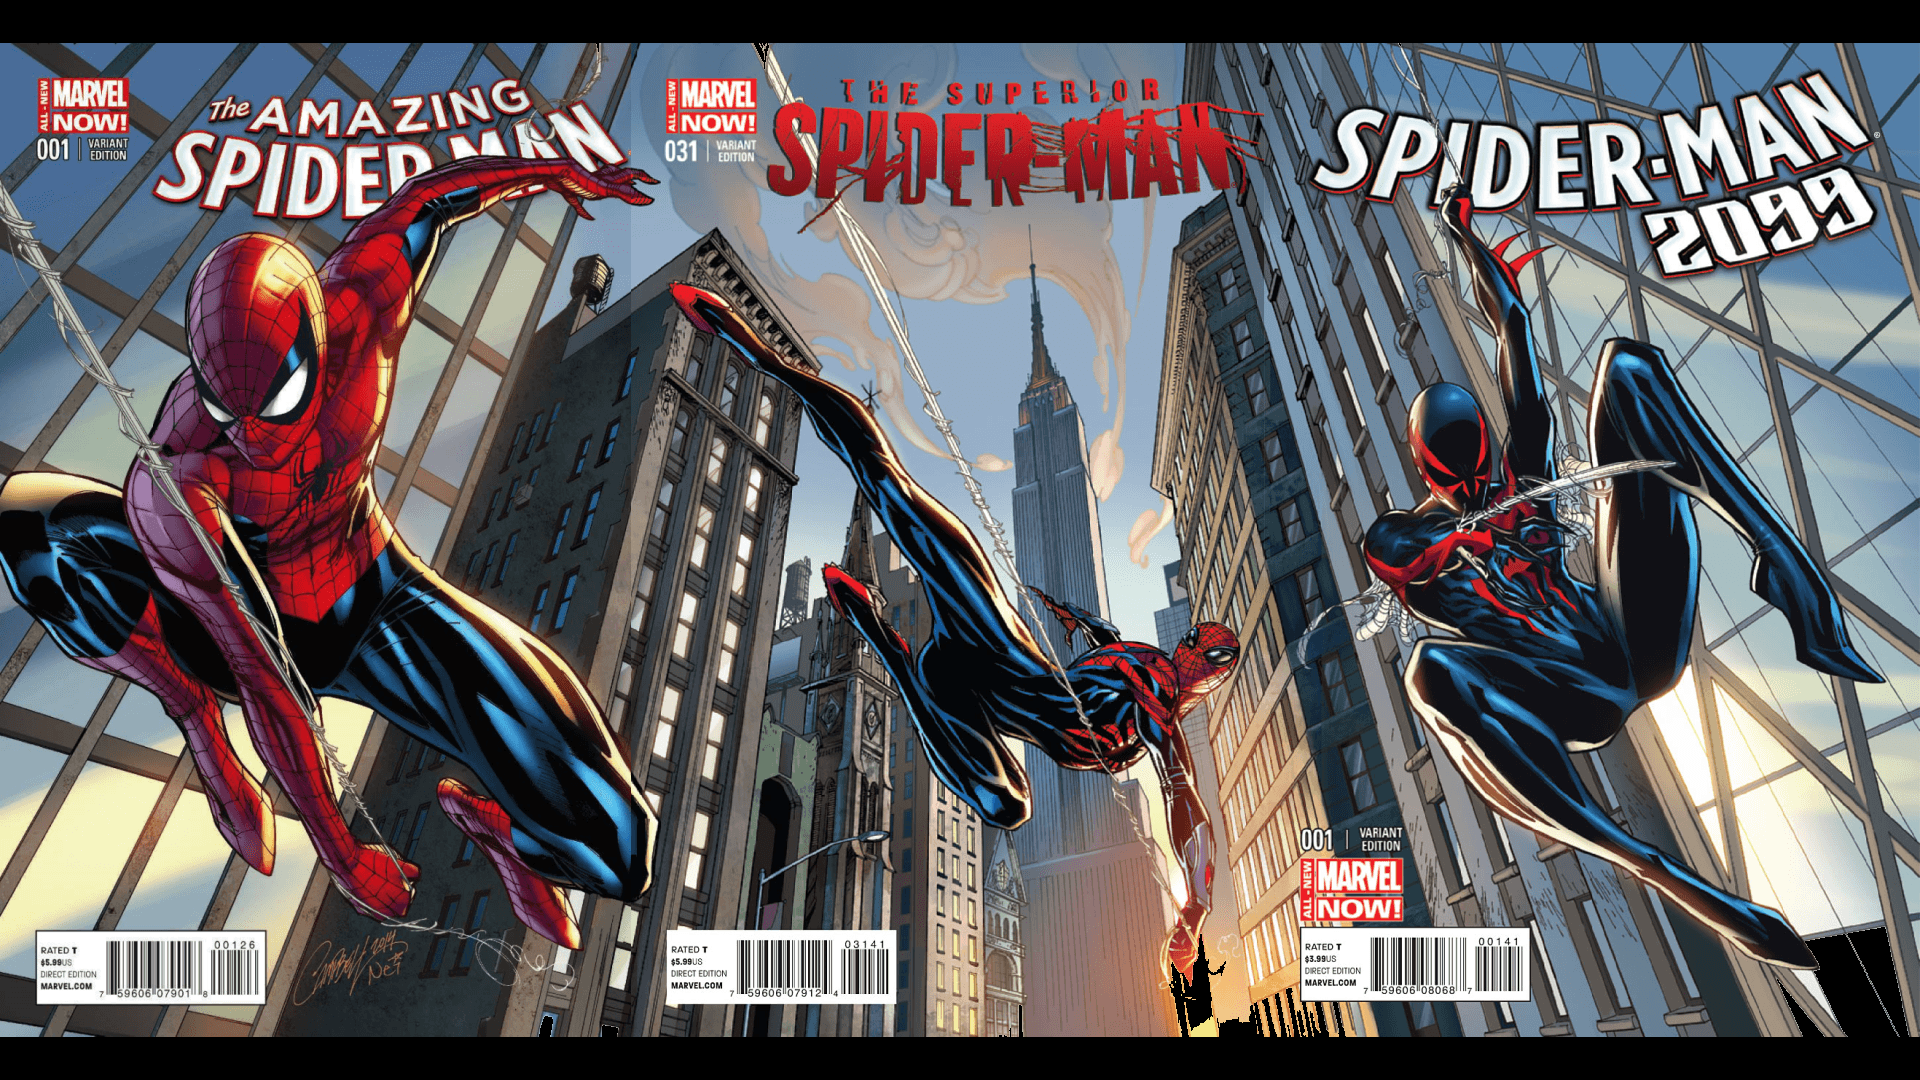 For Those Asking For A Wallpaper Of The Campbell Spider Man Variants